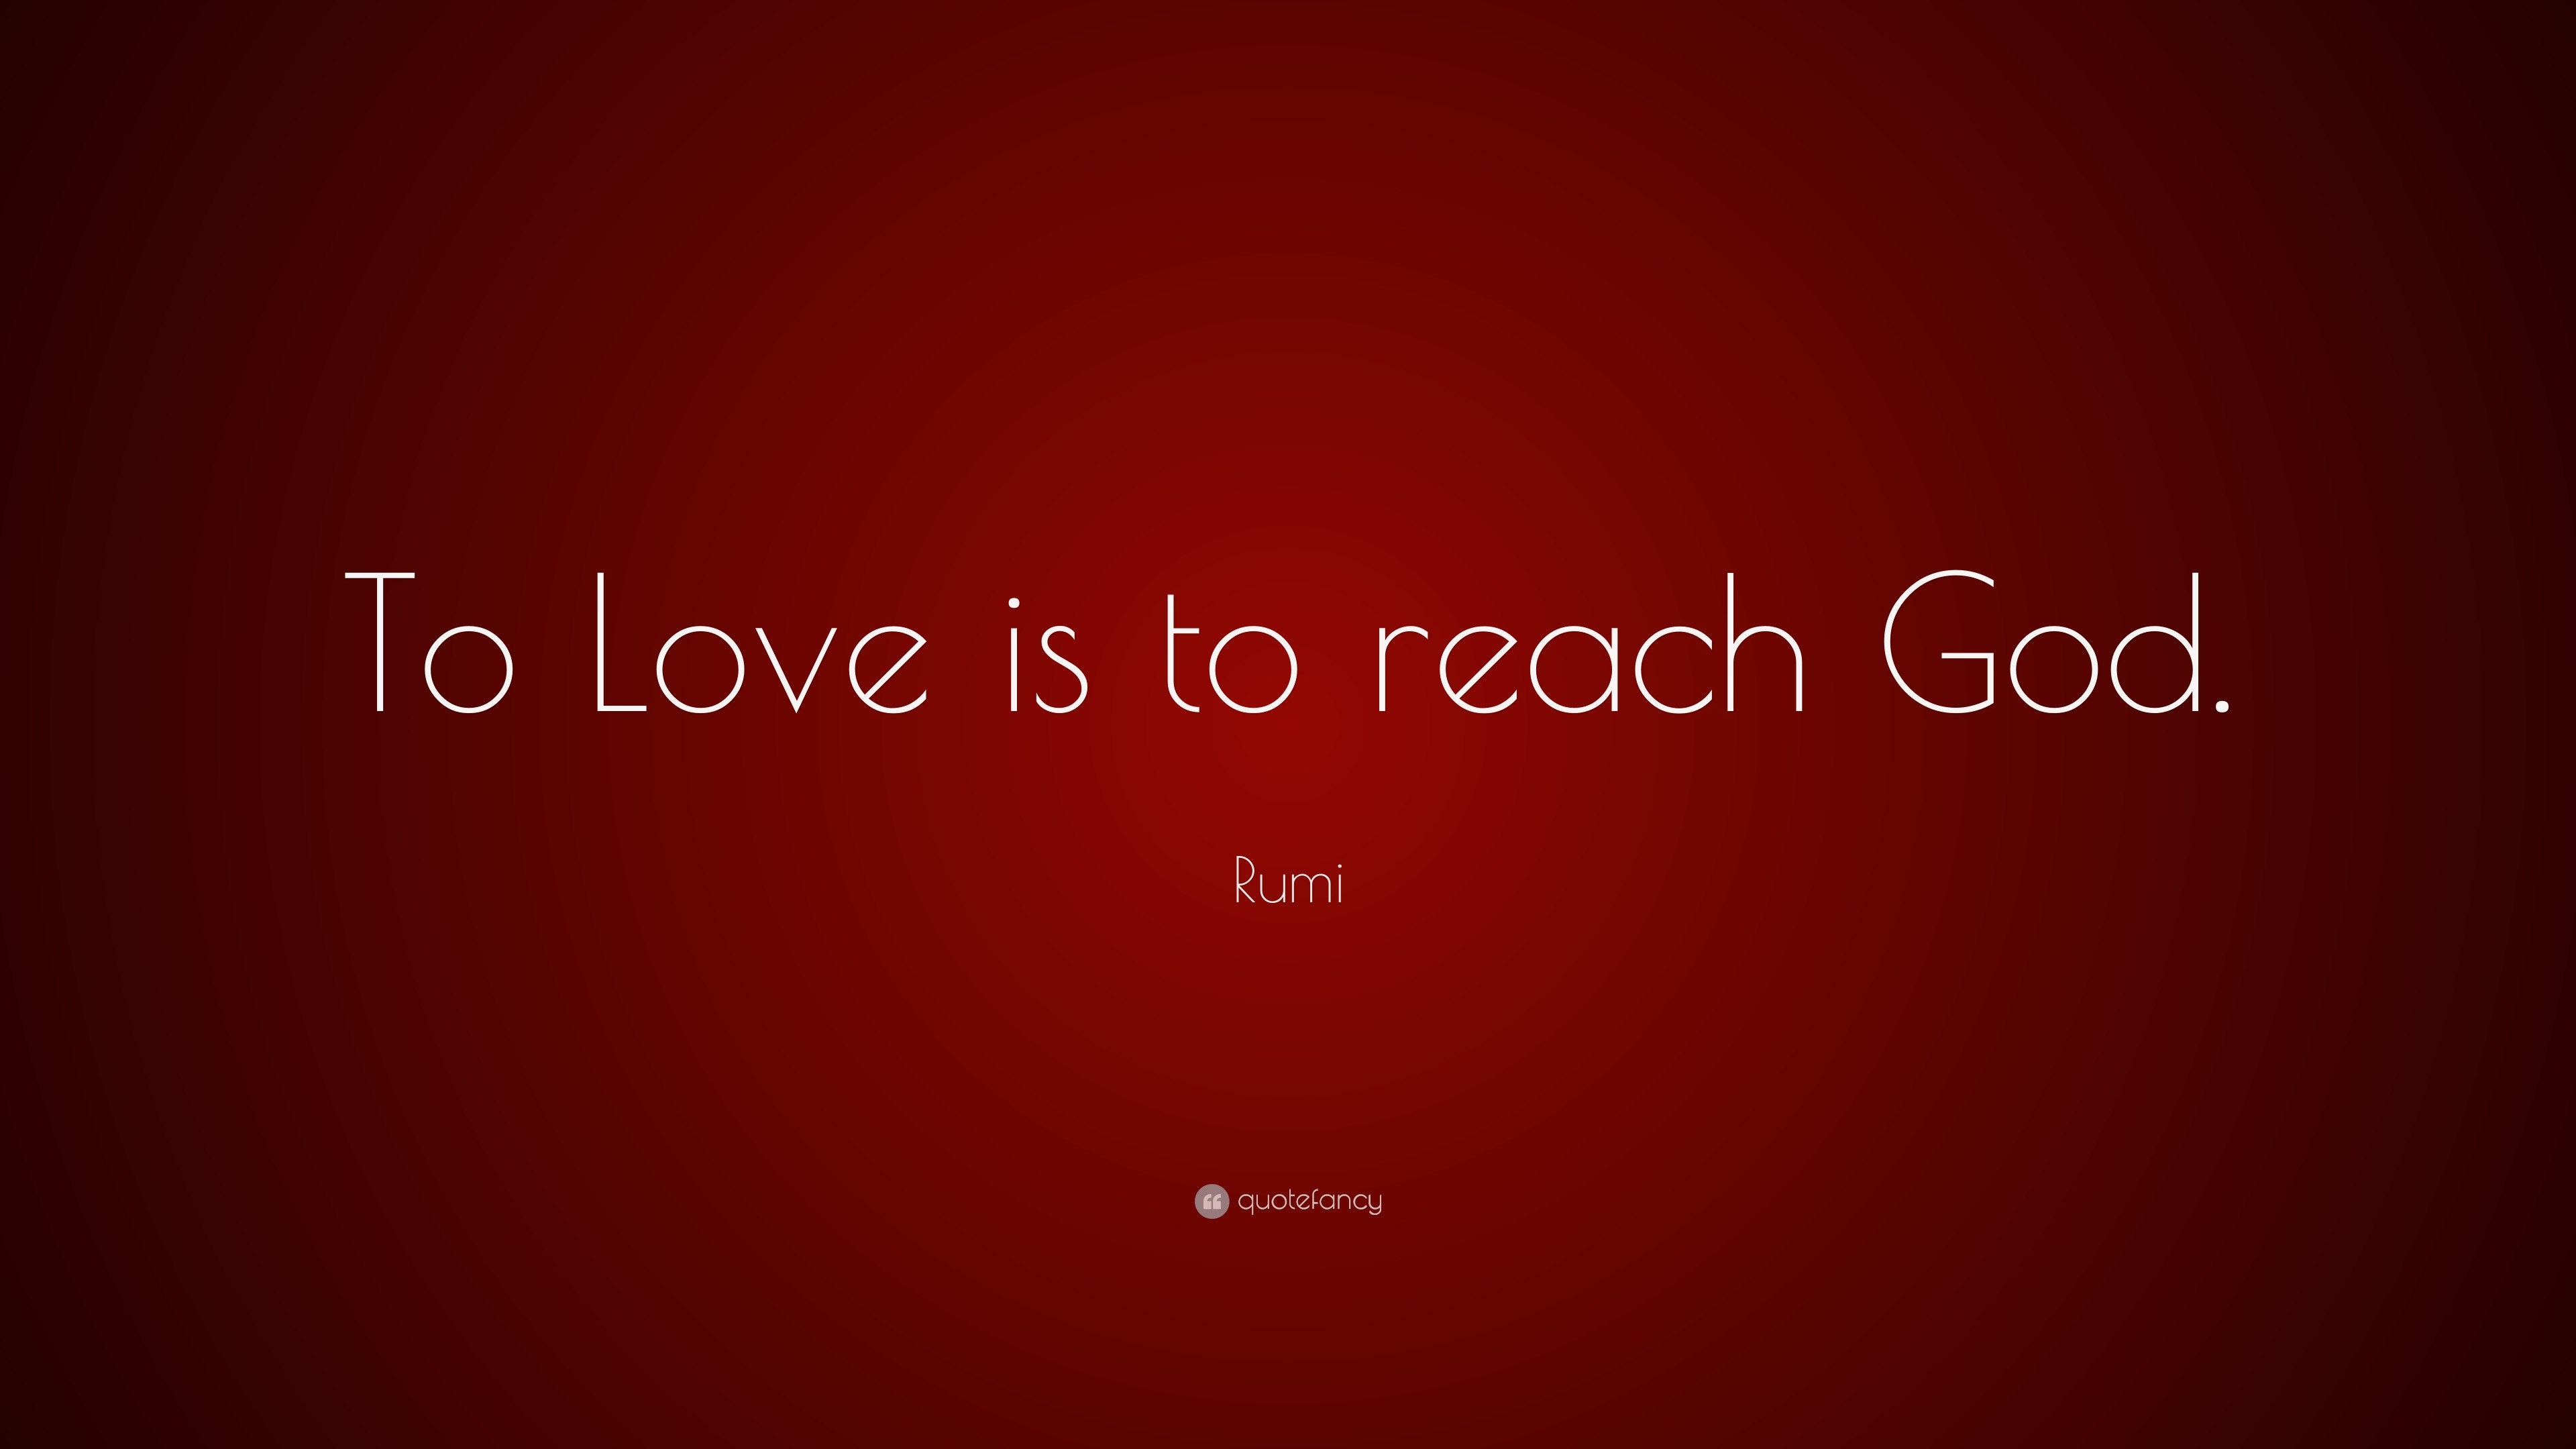 Rumi Quote “To Love is to reach God ”